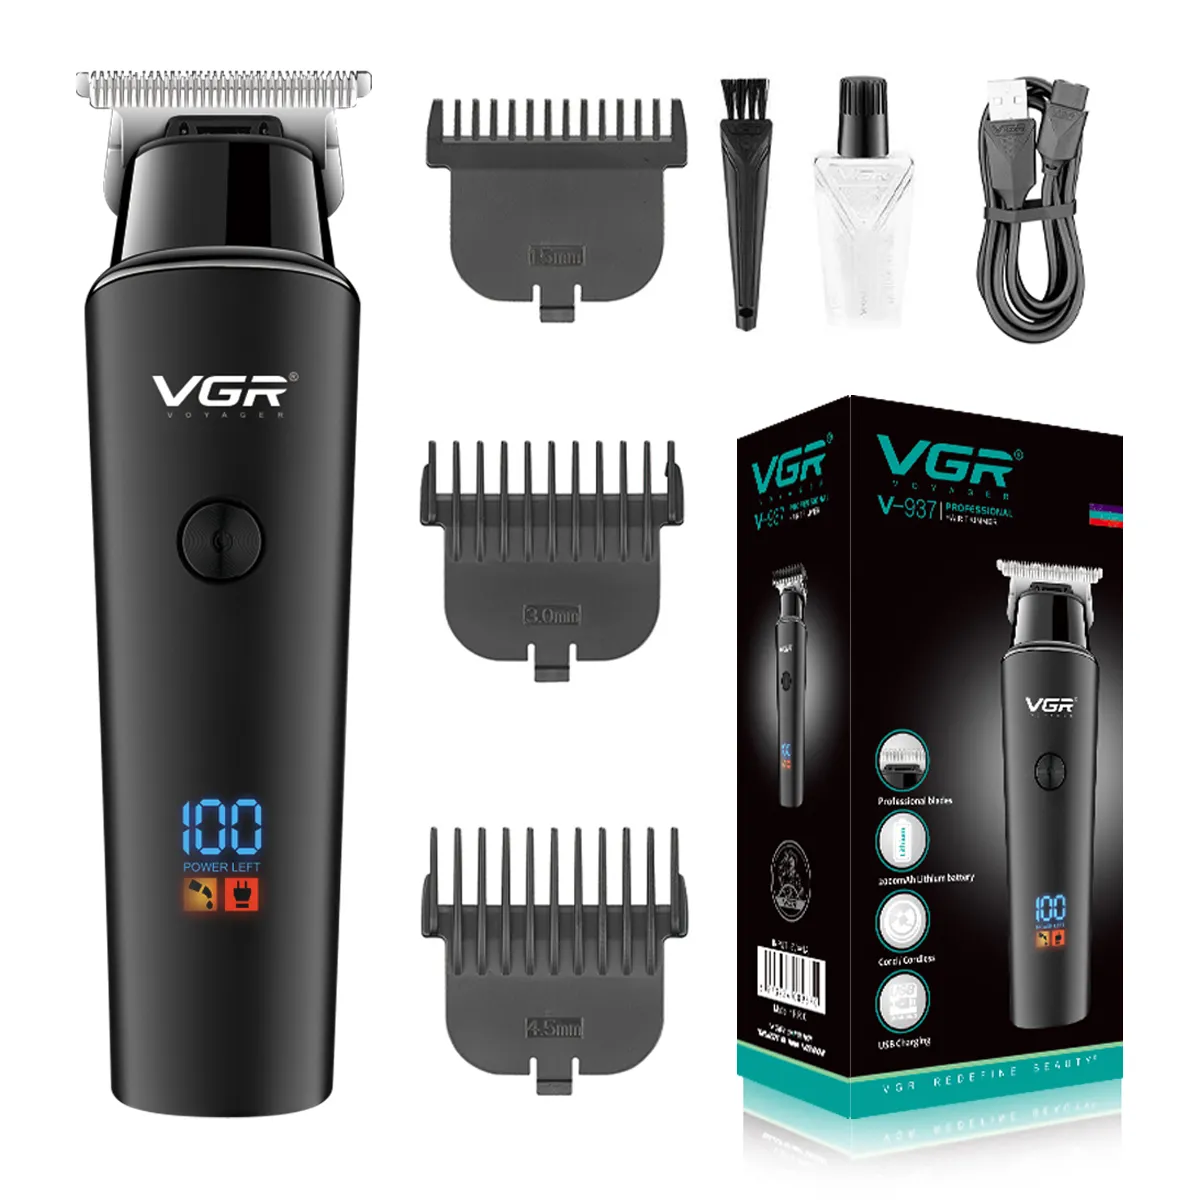 VGR V-937 New Desgin Barber Rechargeable Hair Clippers Professional Electric Cordless Hair Trimmer for Men